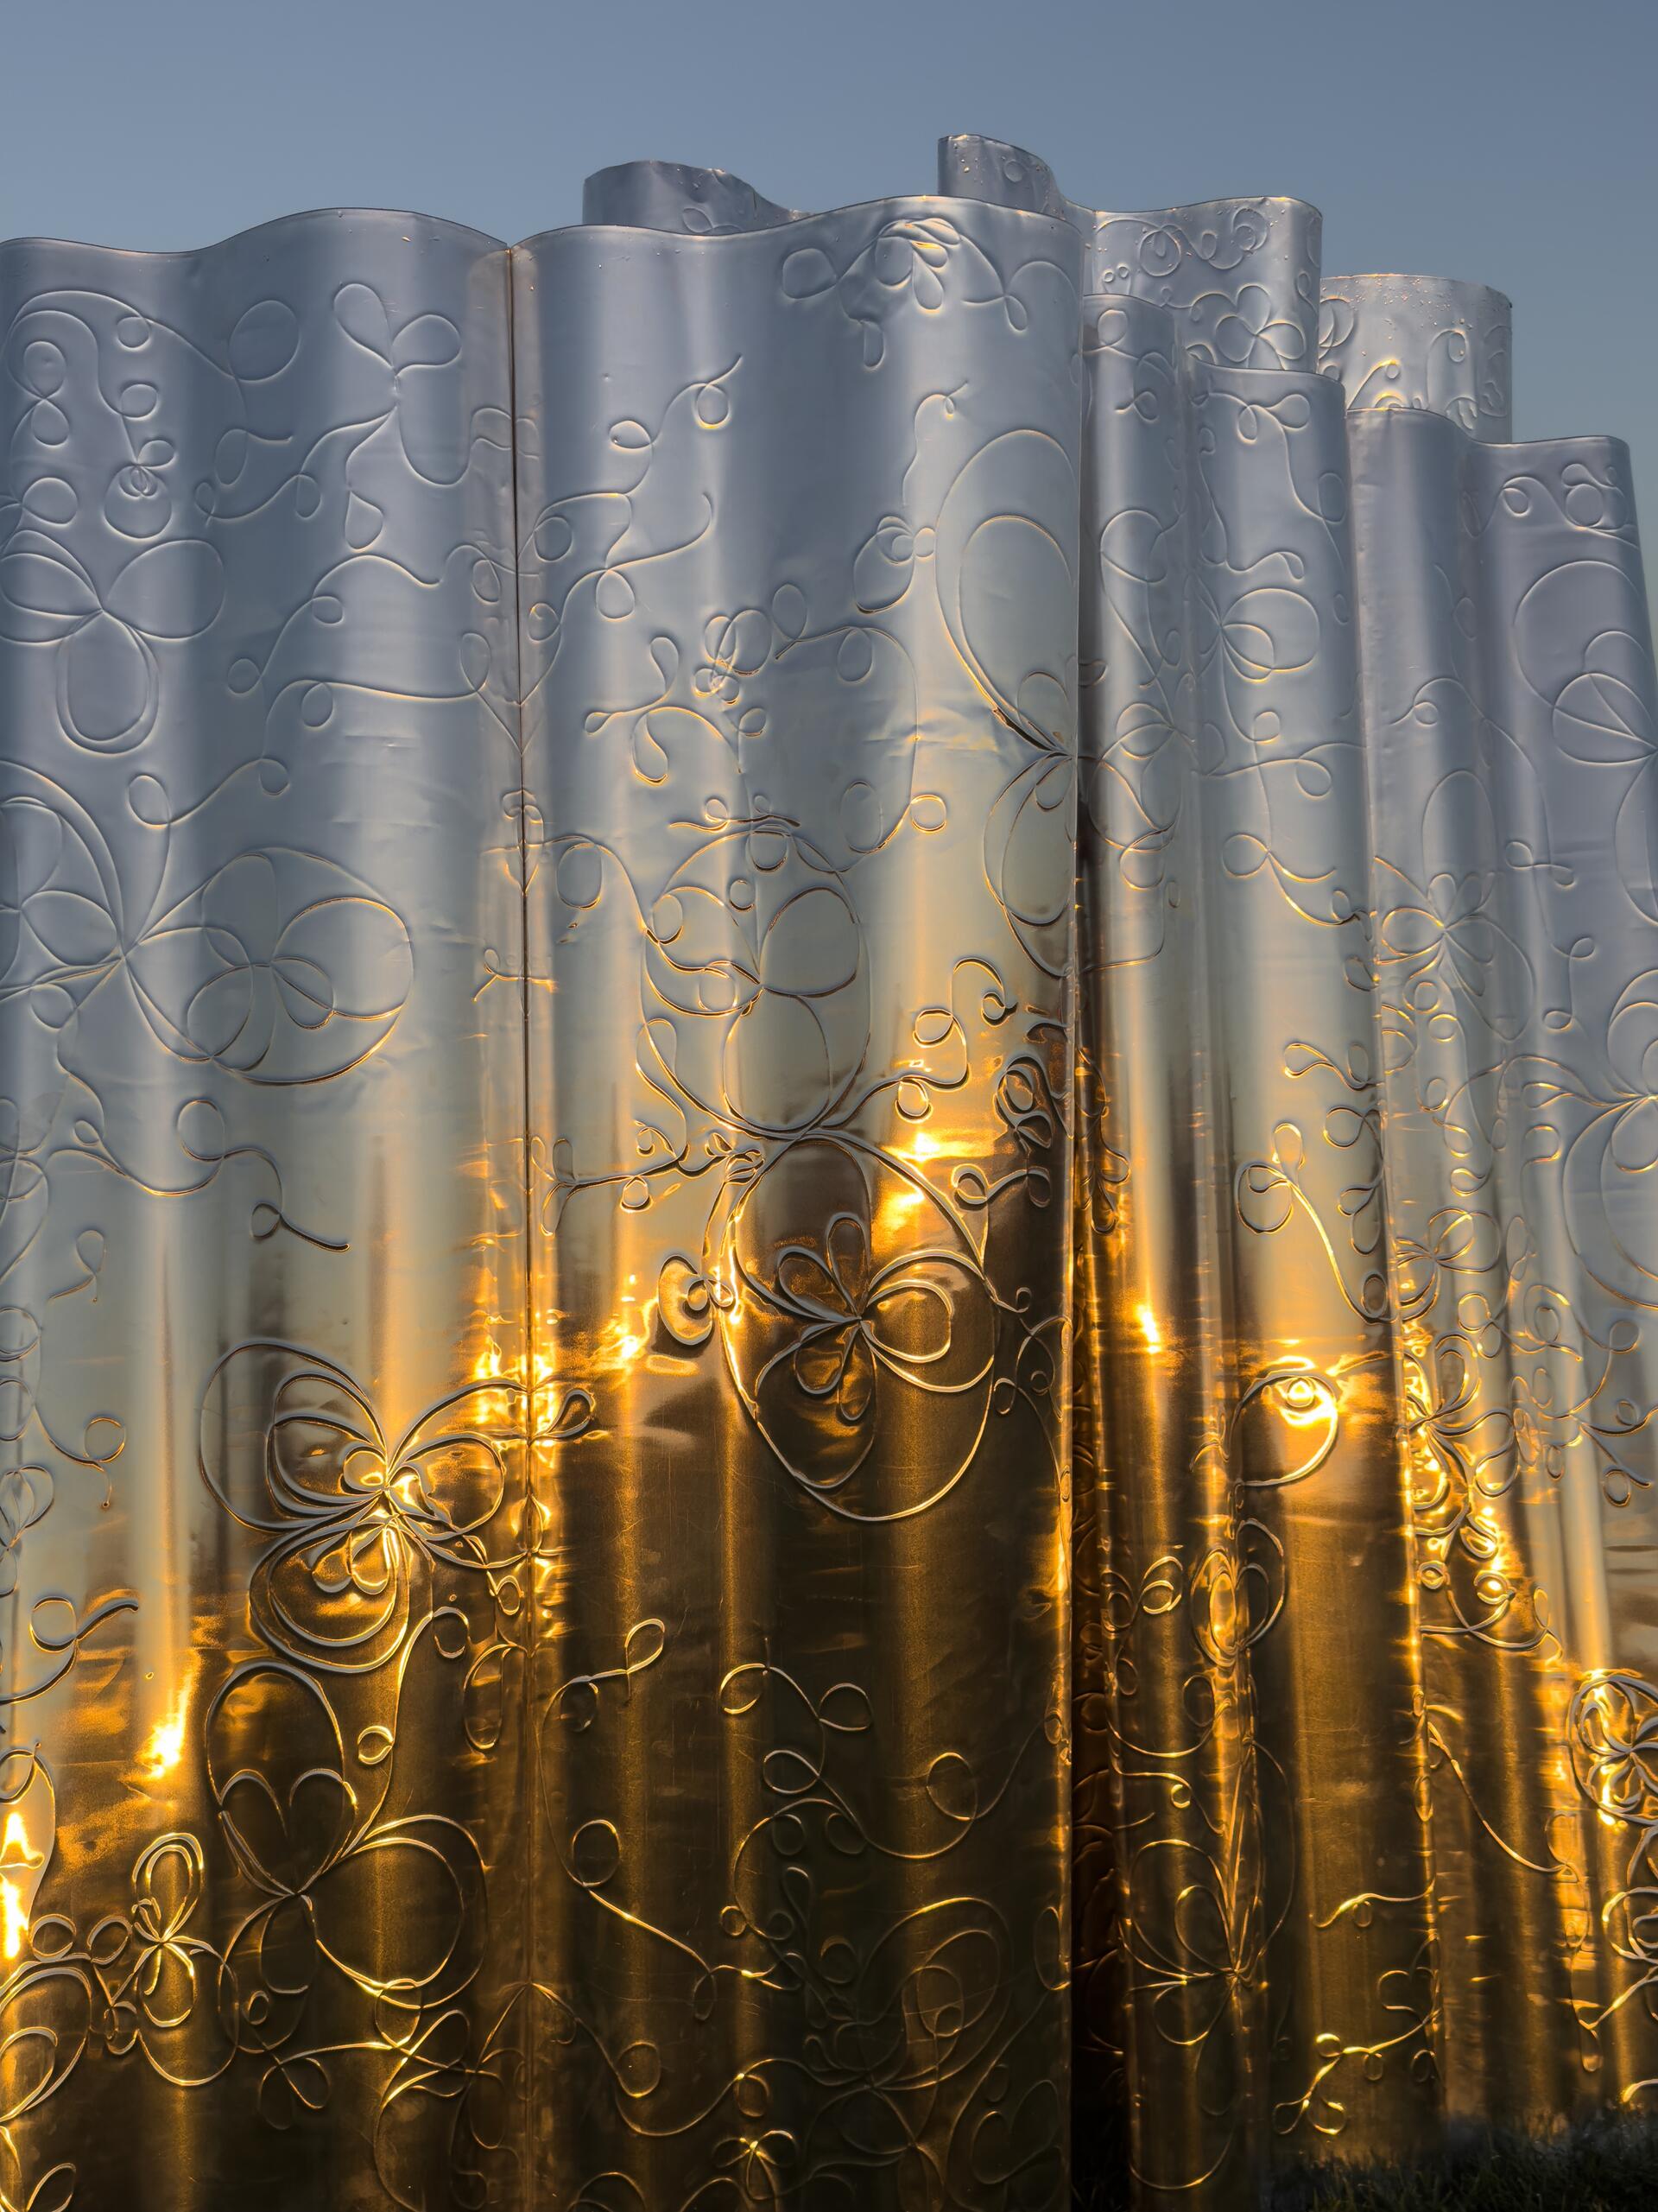 Detail of a metallic, wavy privacy screen with intricate floral patterns reflecting the golden hues of a sunrise. The surface creates a shimmering effect, capturing the light and adding texture to the smooth, undulating forms.